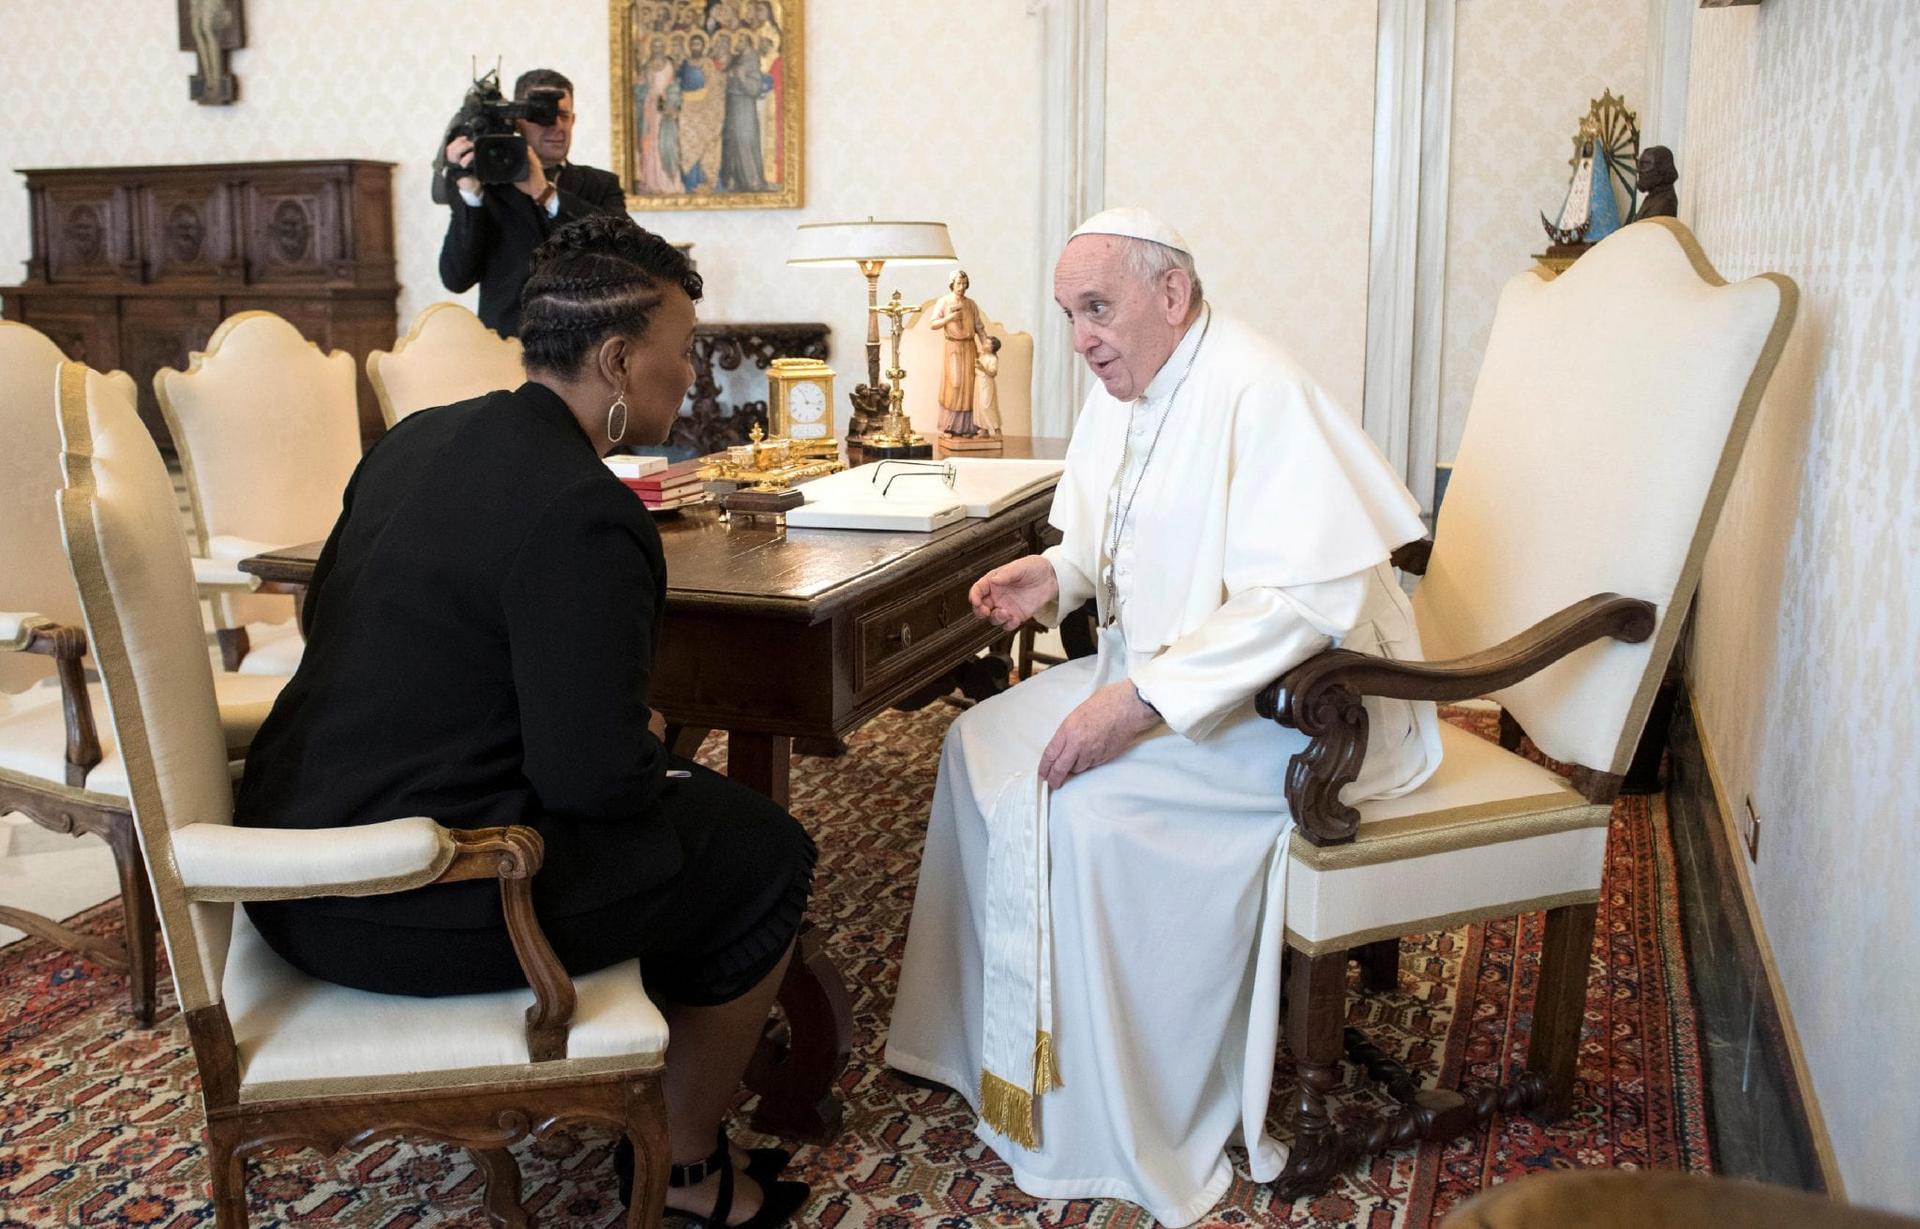 MLK’s daughter, Bernice, has private audience with pope